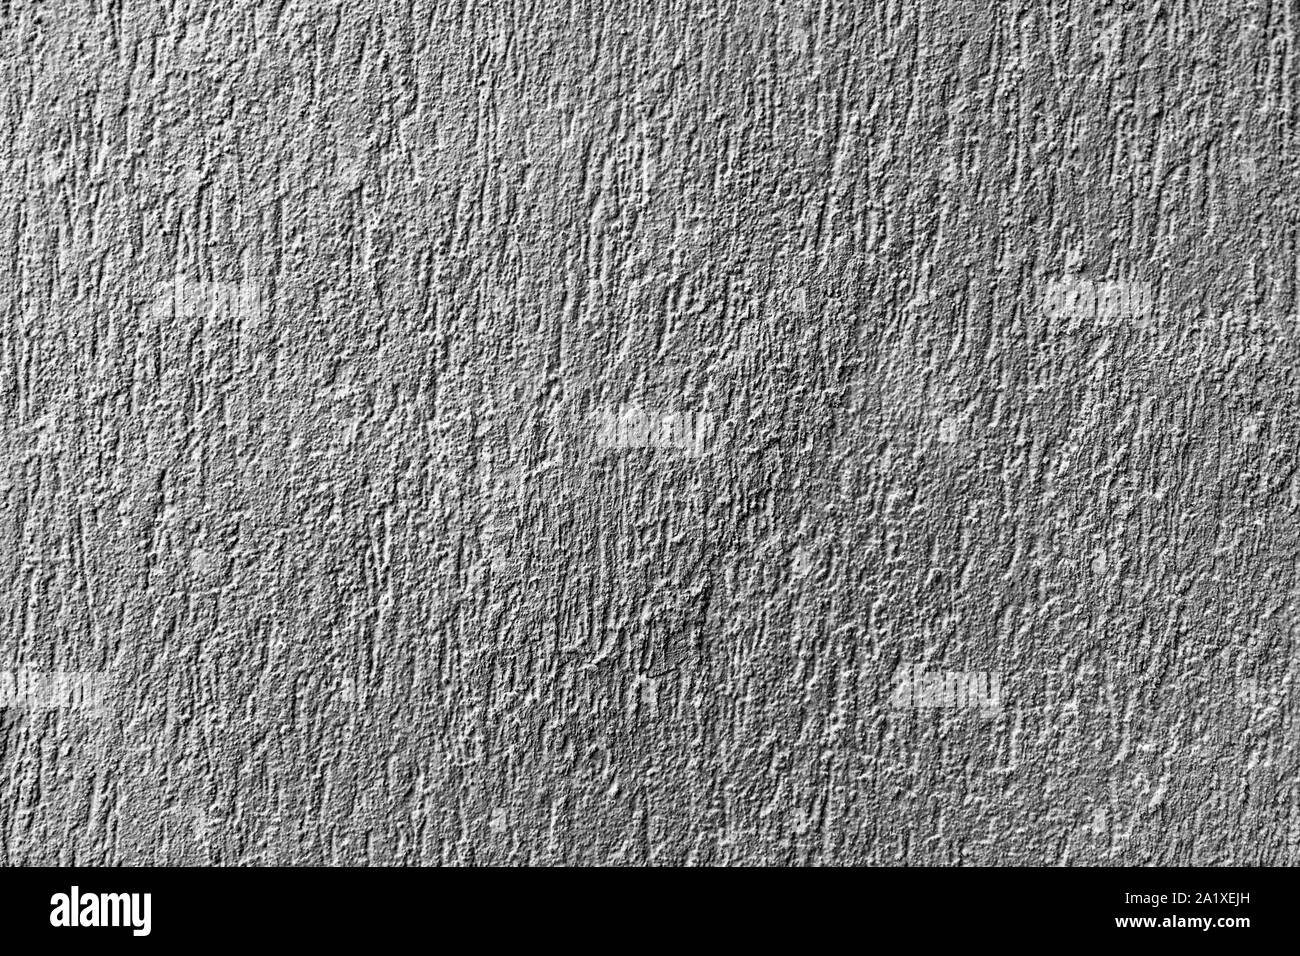 Grey concrete texture, high contrast textured wall background Stock Photo